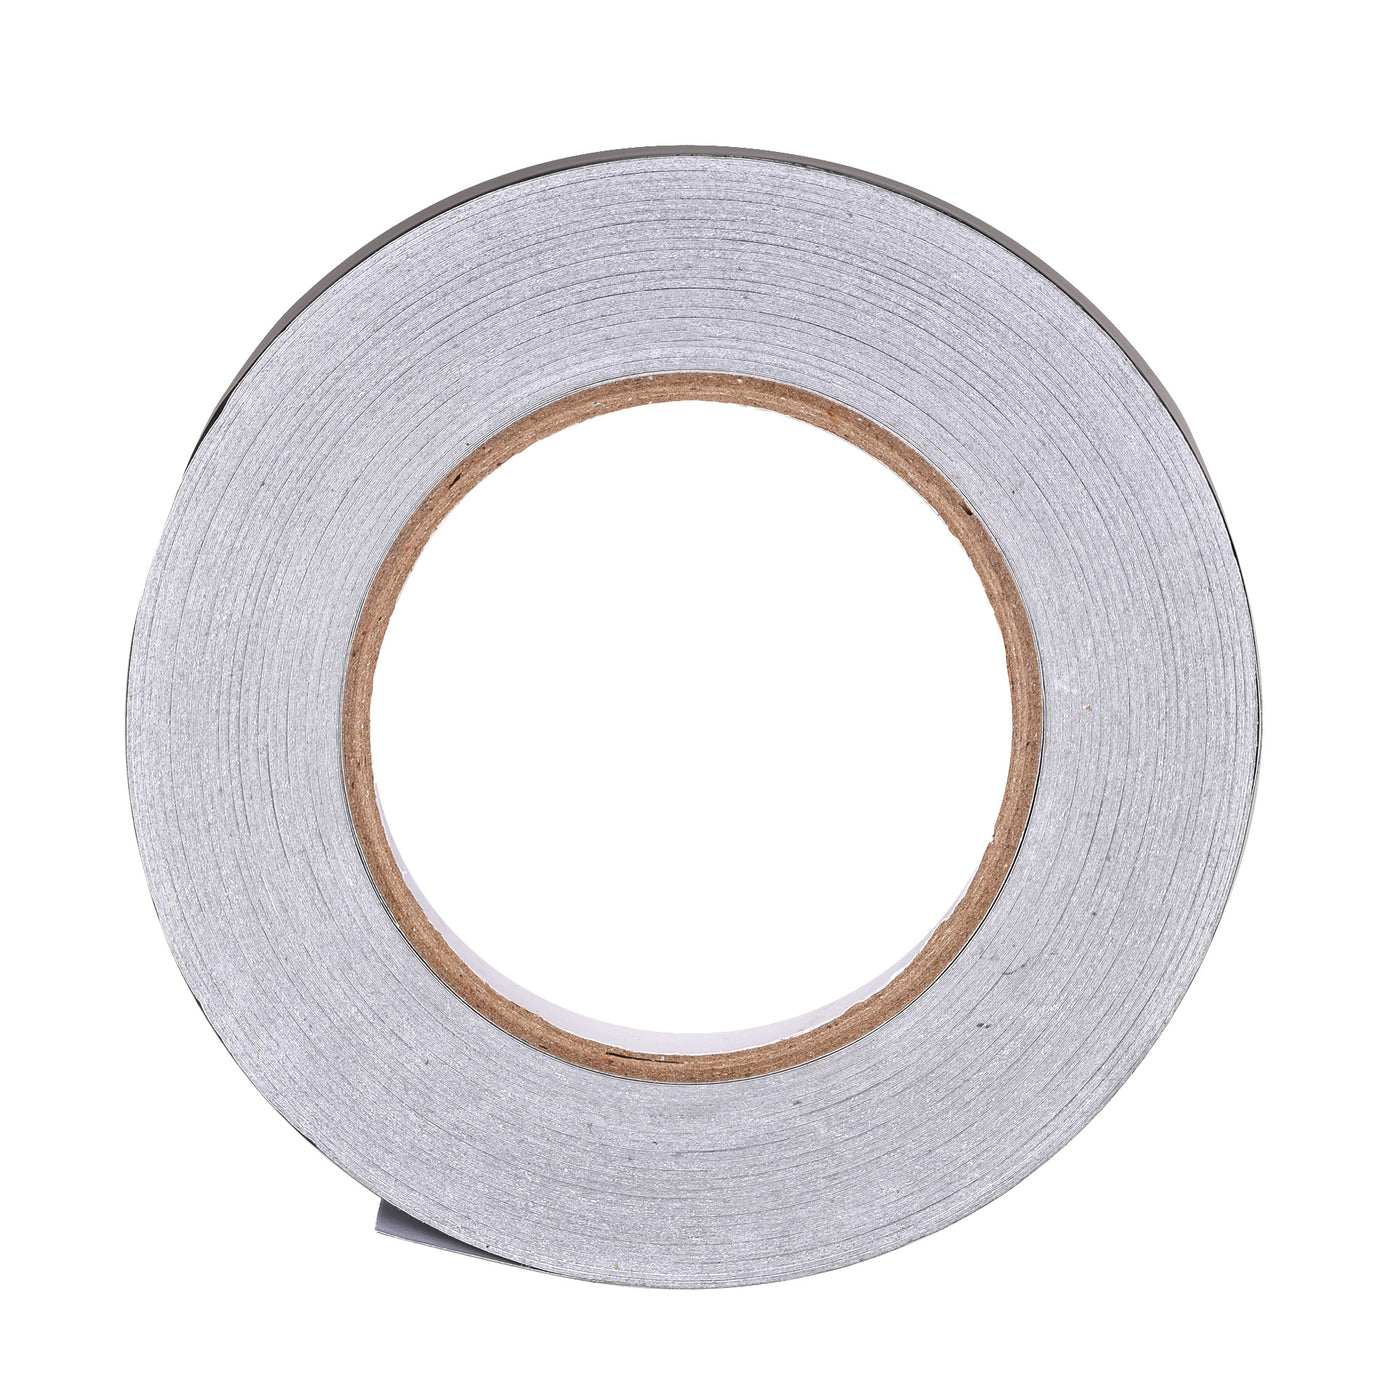 uxcell Uxcell 10mm Aluminum Foil Tape for HVAC, Patching Hot and Blocking Light 50m/164ft 2pcs